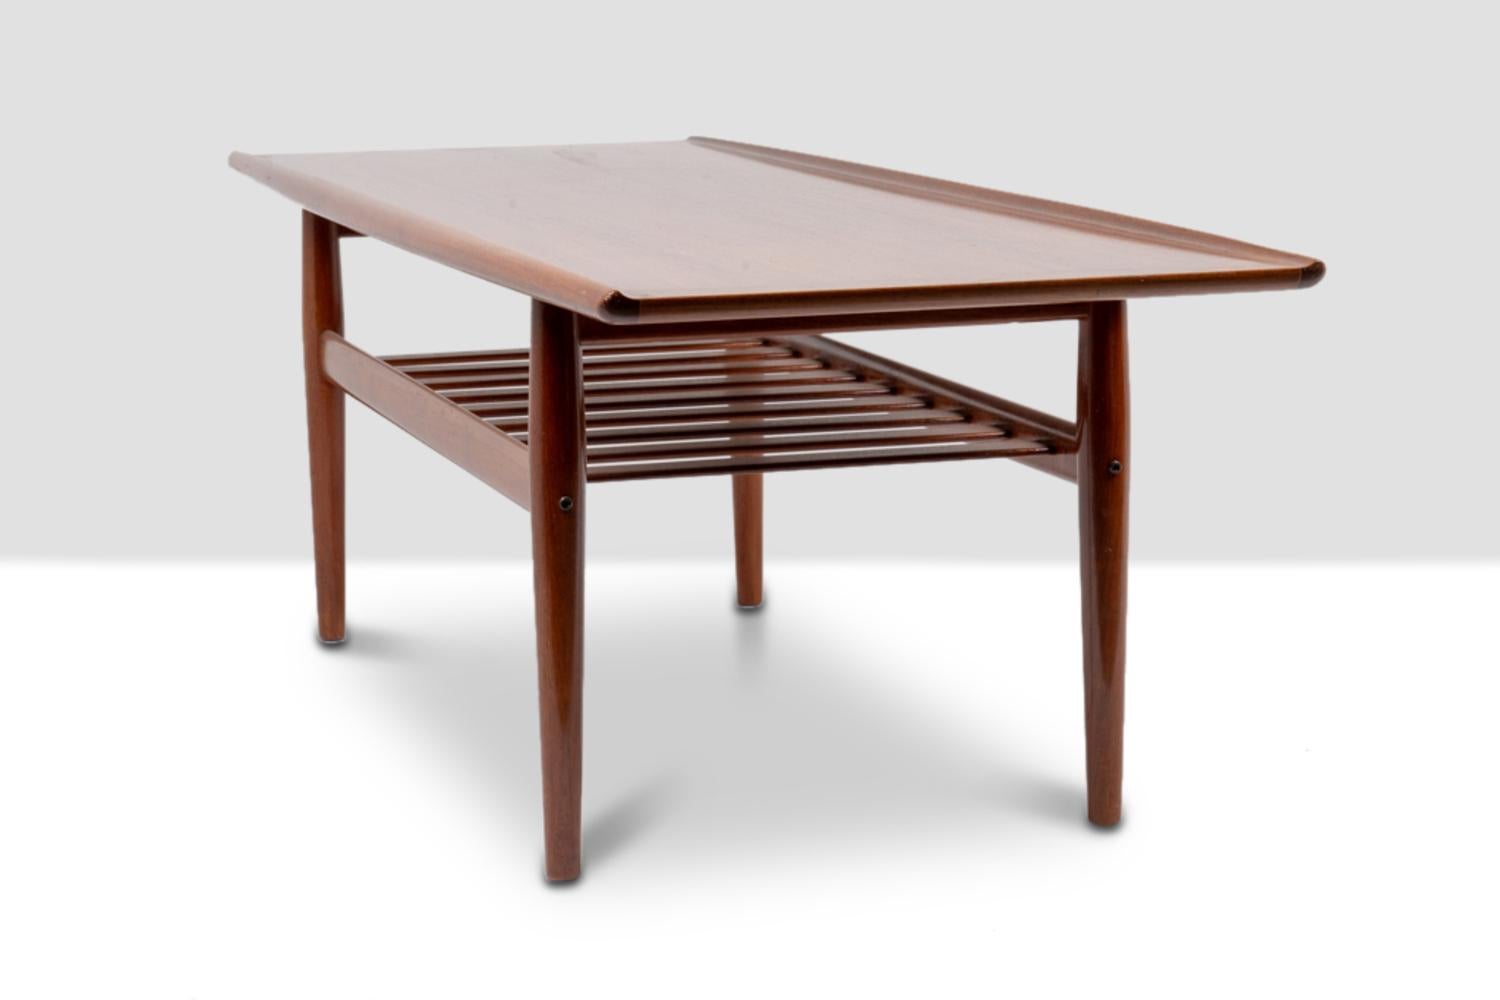 20th Century Grete Jalk for Glostrup. “GJ106” coffee table in teak. 1960s. For Sale